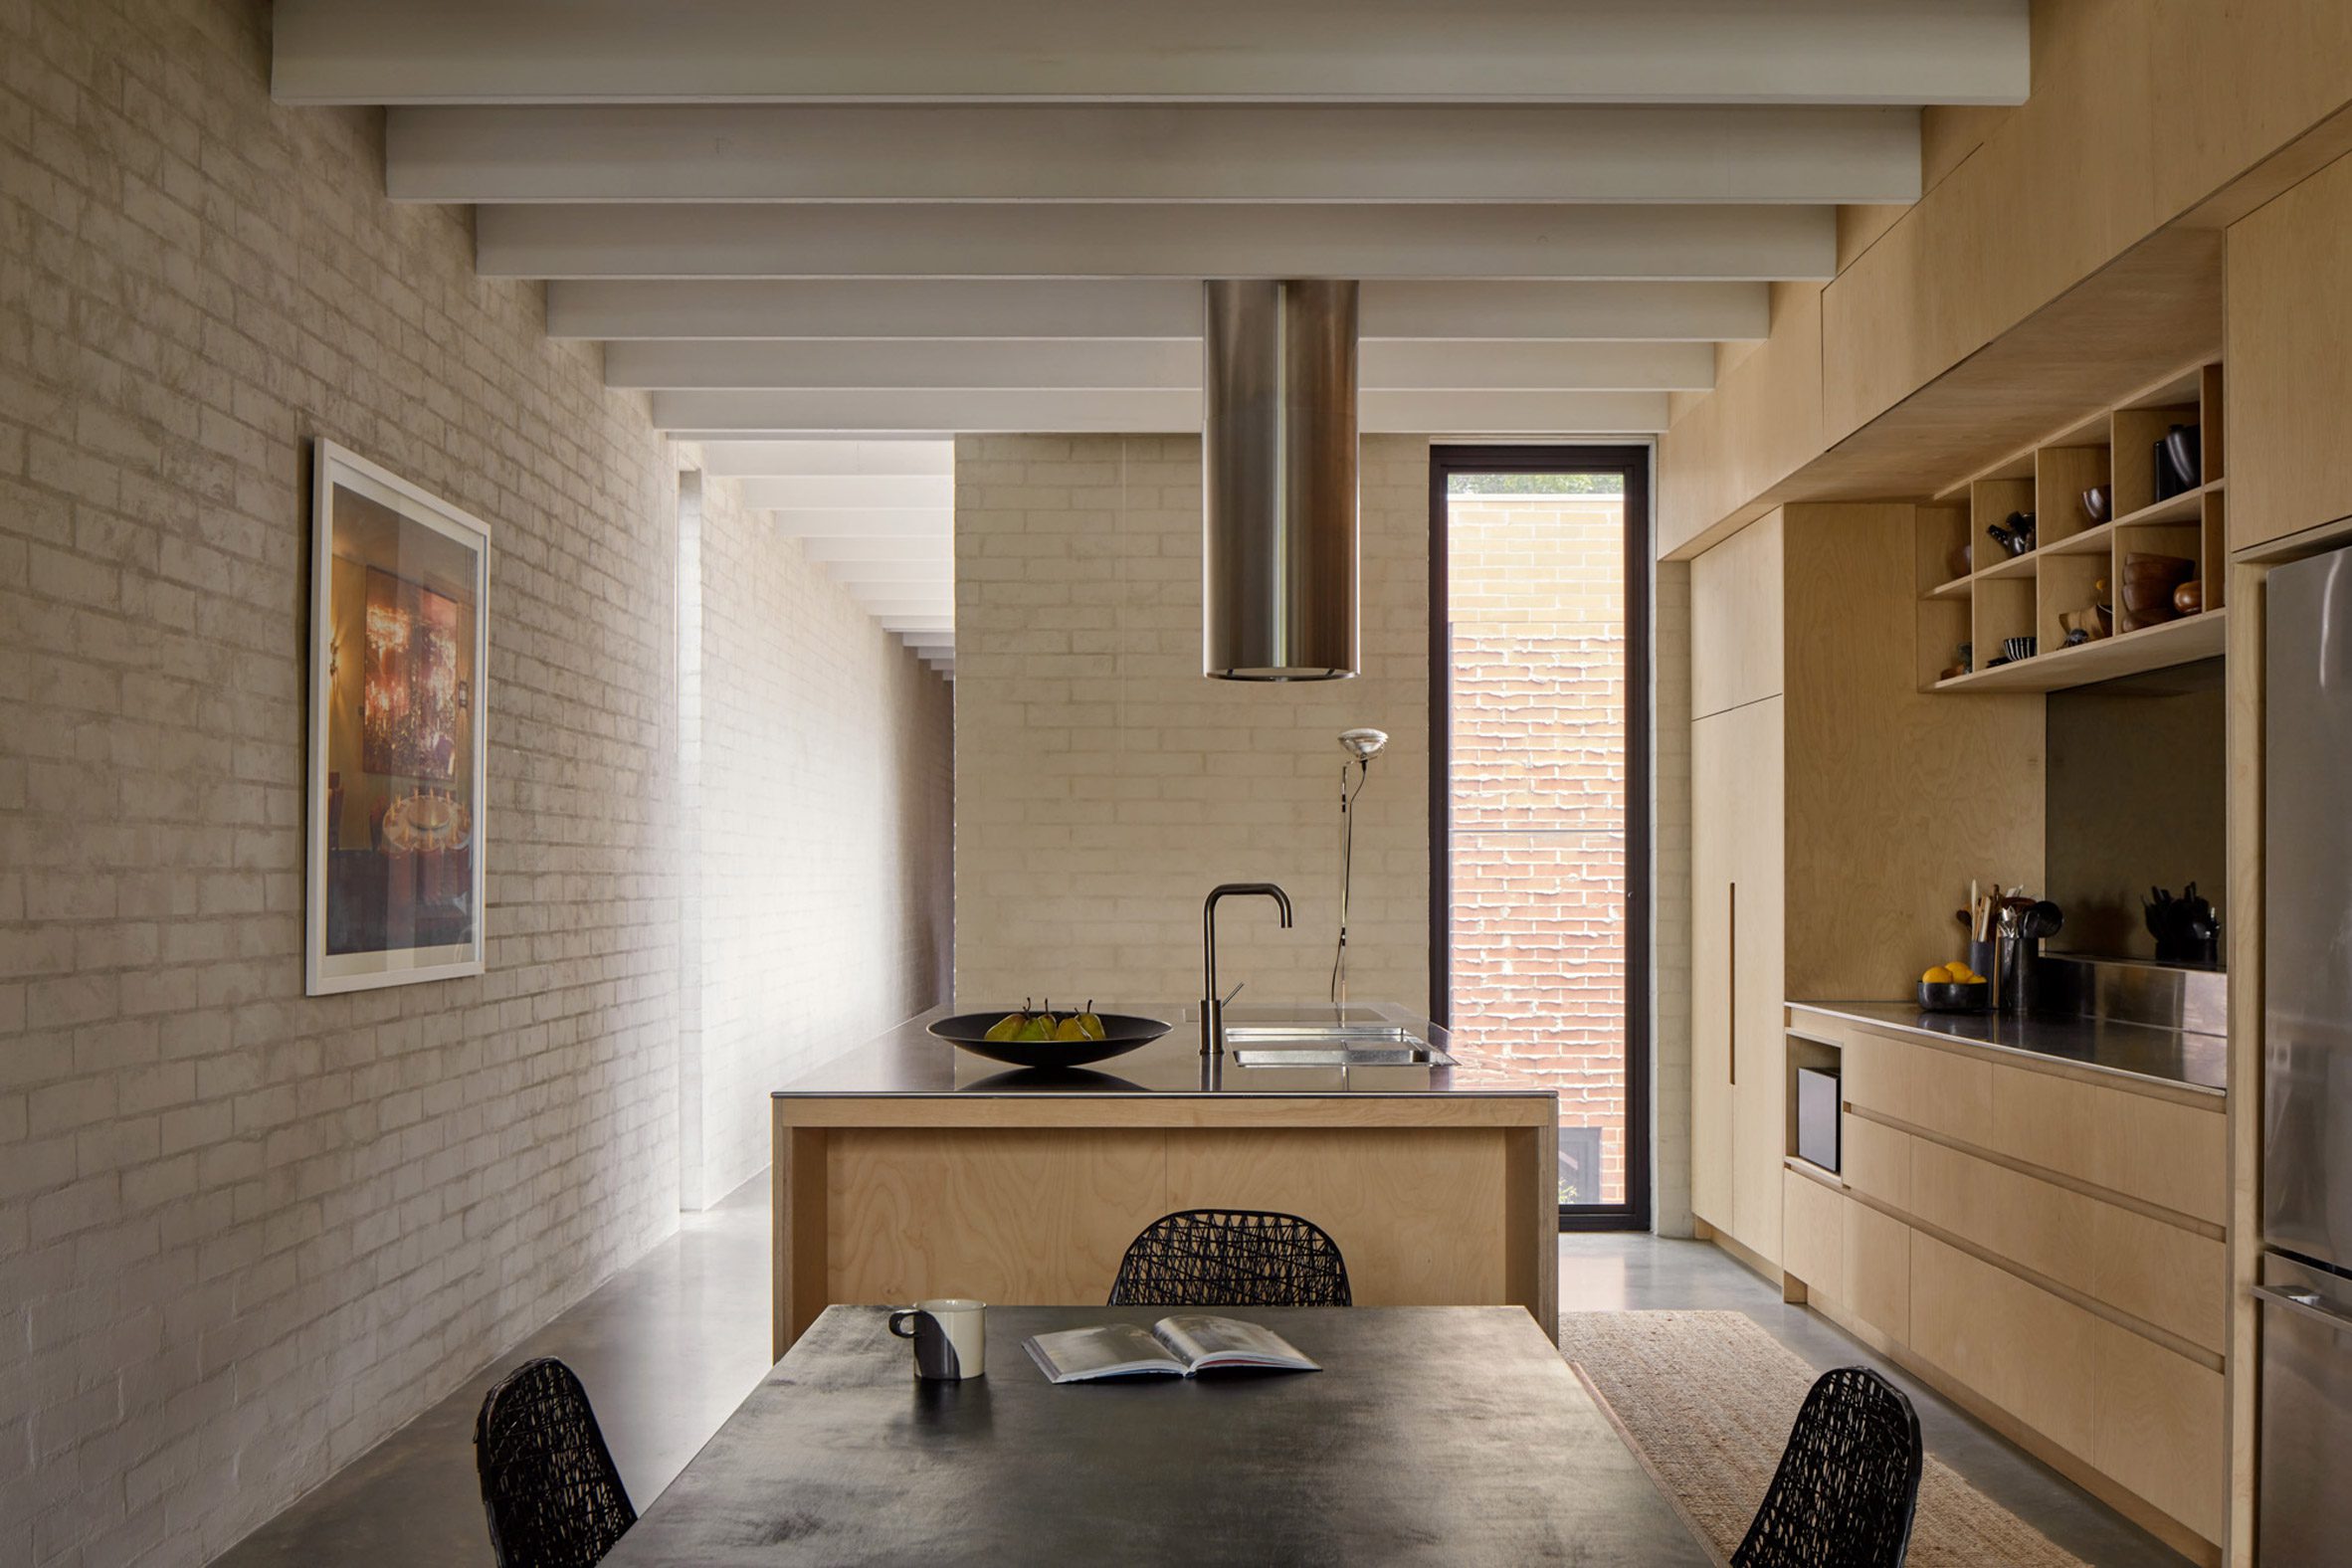 Kitchen and interiors of The Brick House by Studio Roam in Perth